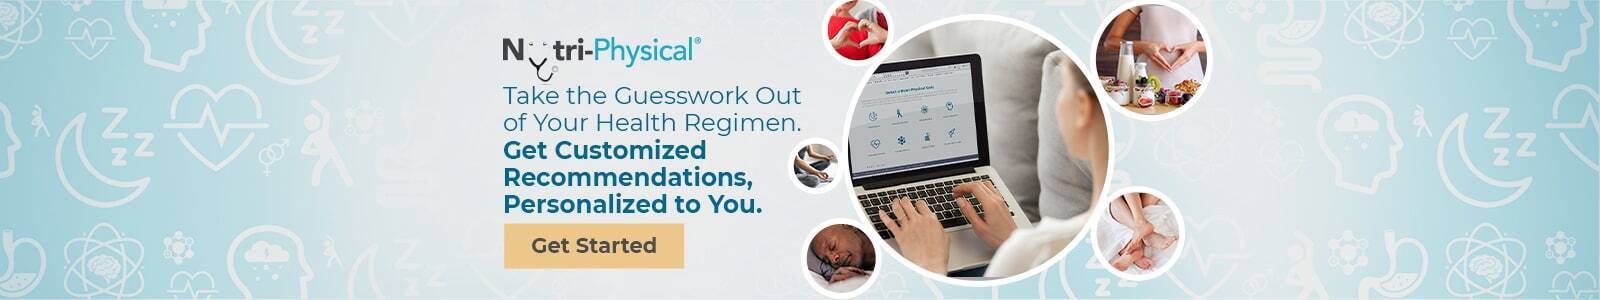 NutriPhysical. Take the guesswork out of your health regimen. Get customized recommendations, personalized to you. Take your free quiz now! Get started.